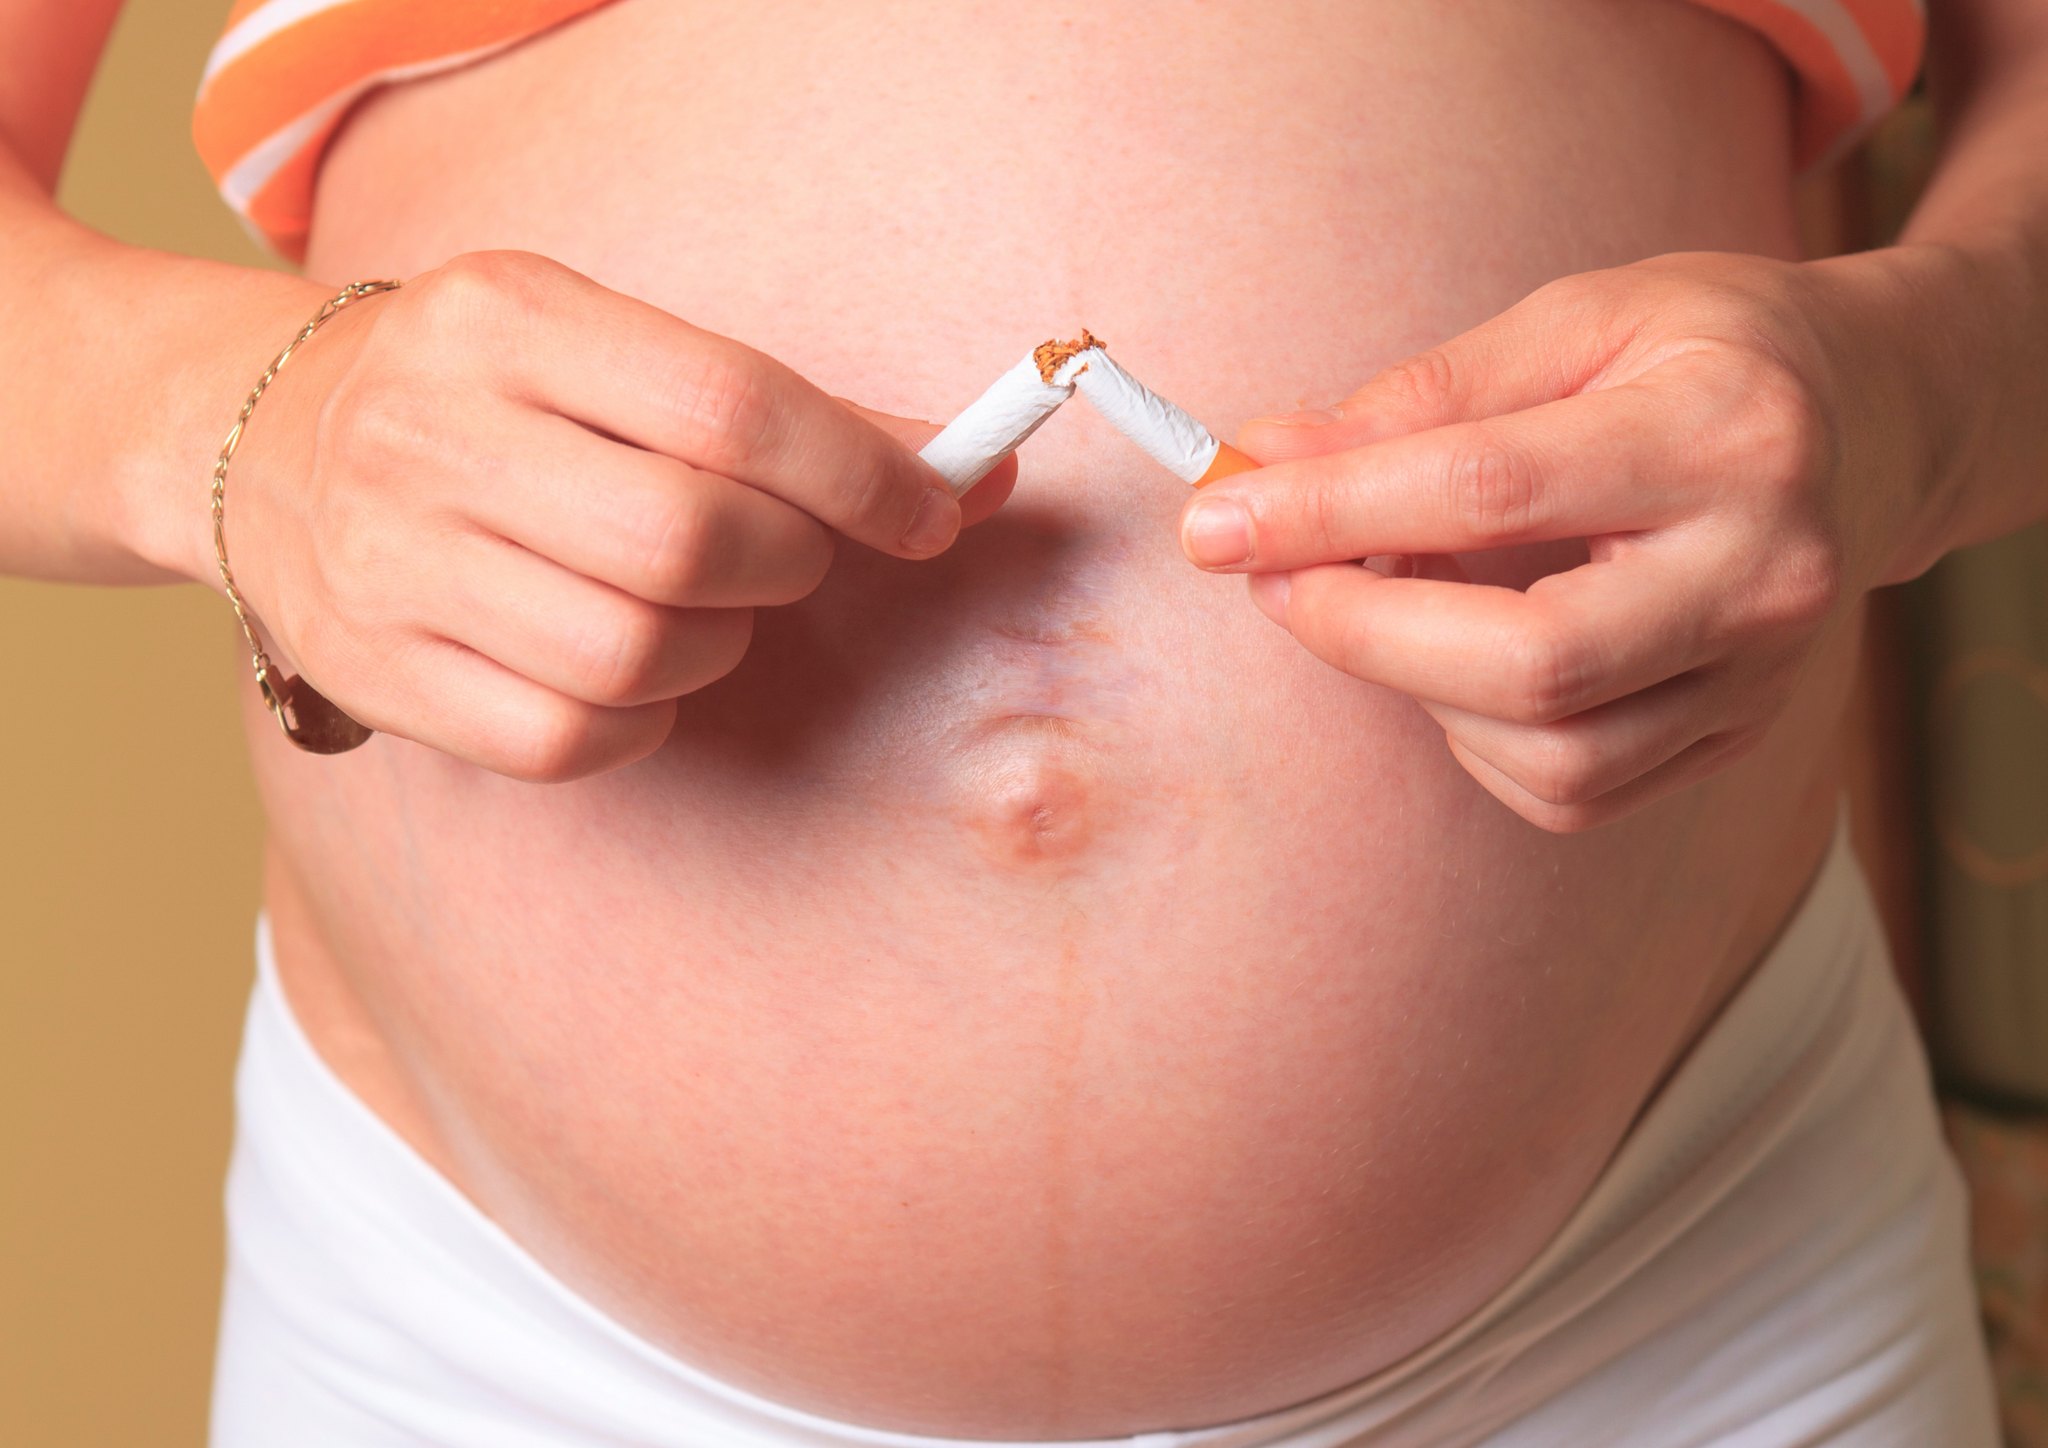 Pregnant lady holding a  cigarette.